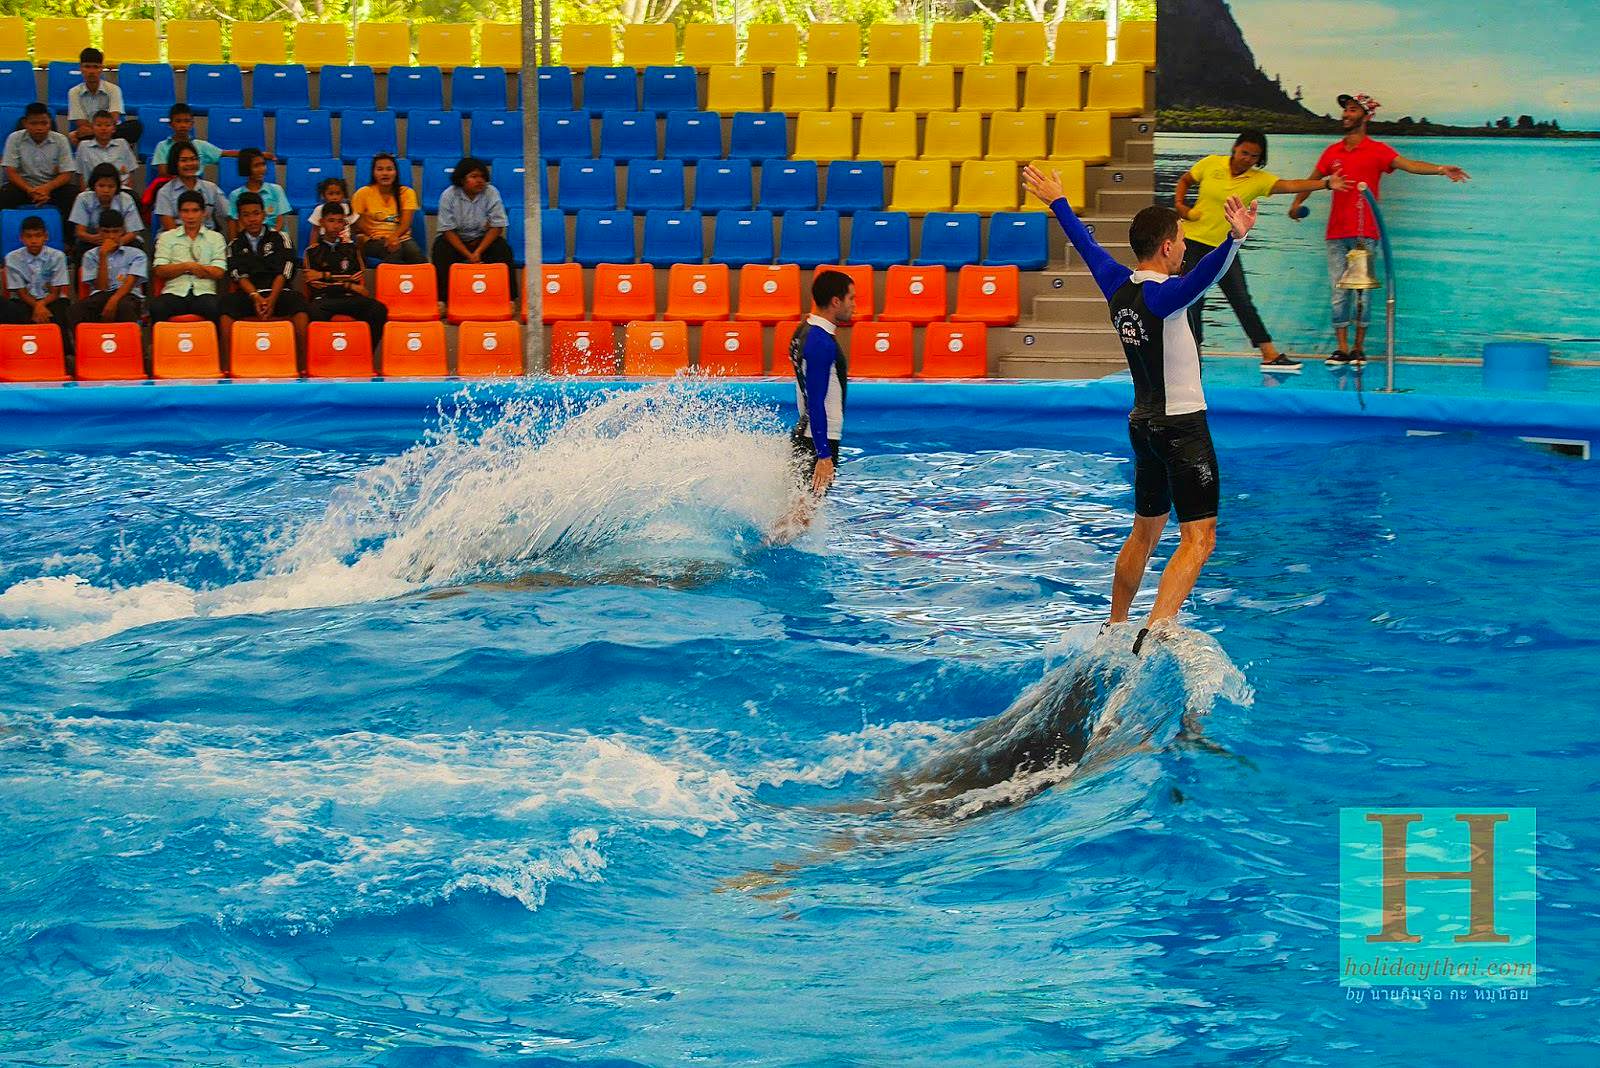 Exciting dolphins bay show at Phuket